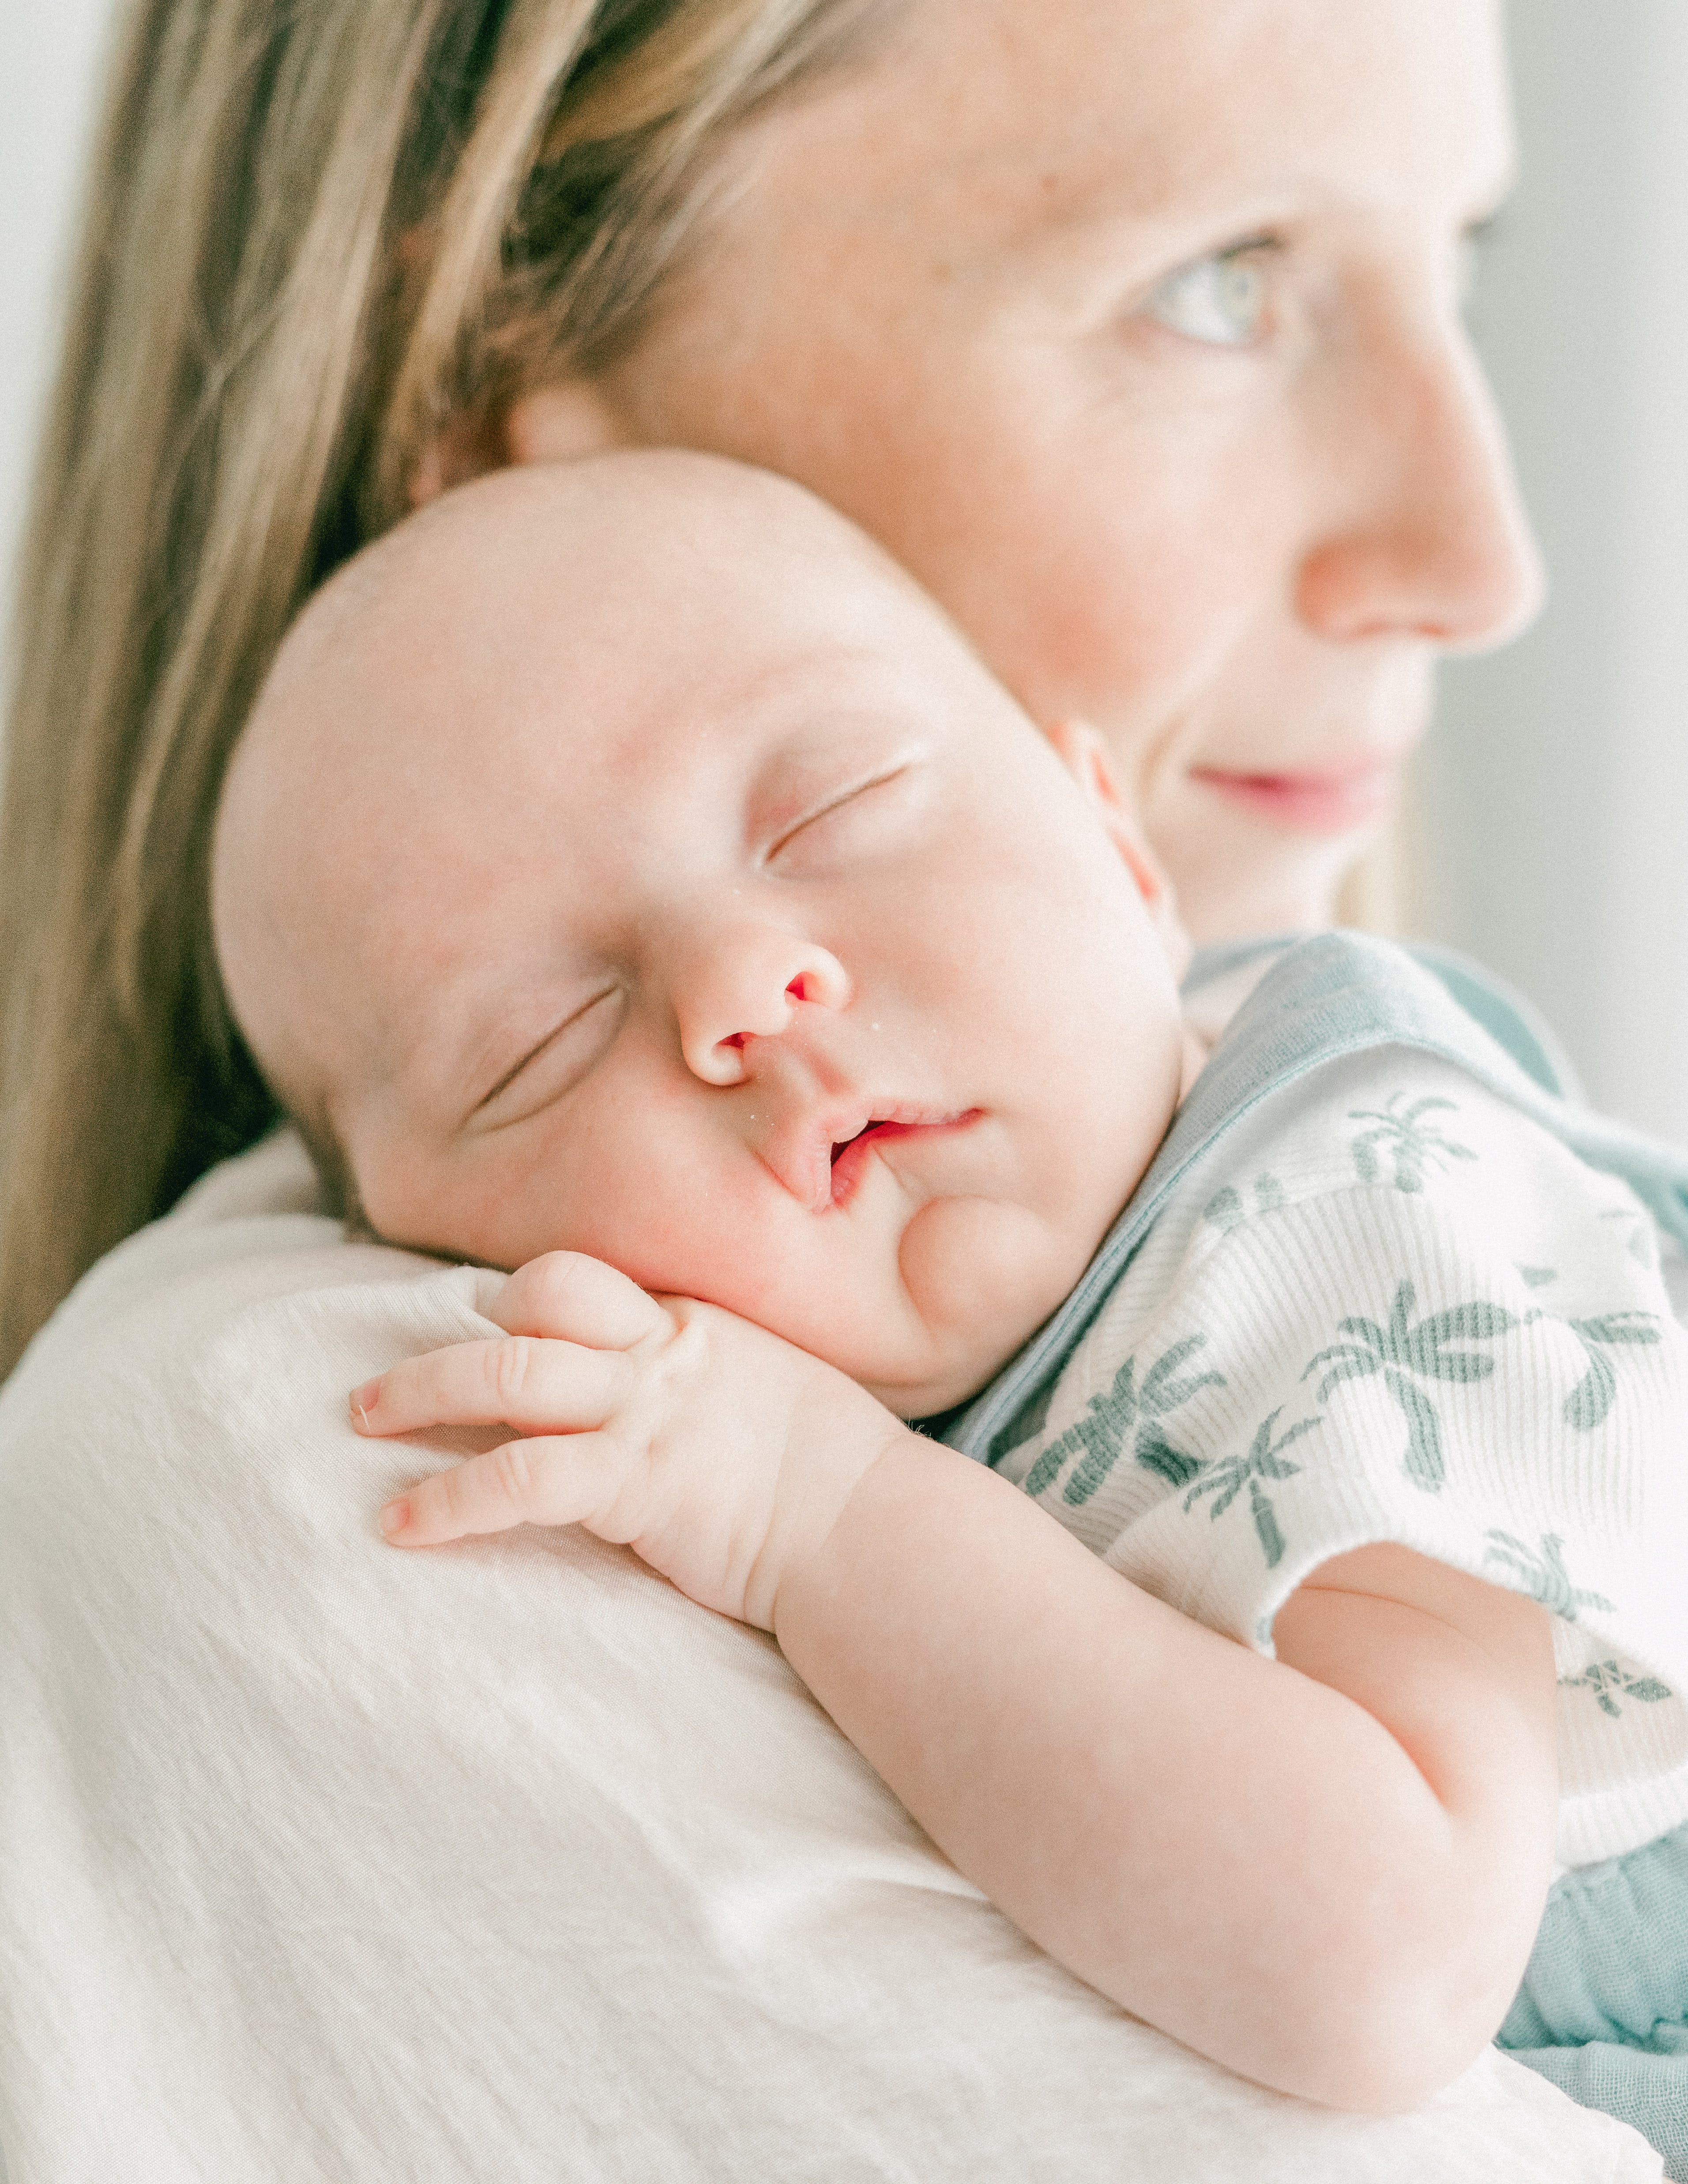 A mother and child | Source: Pexels